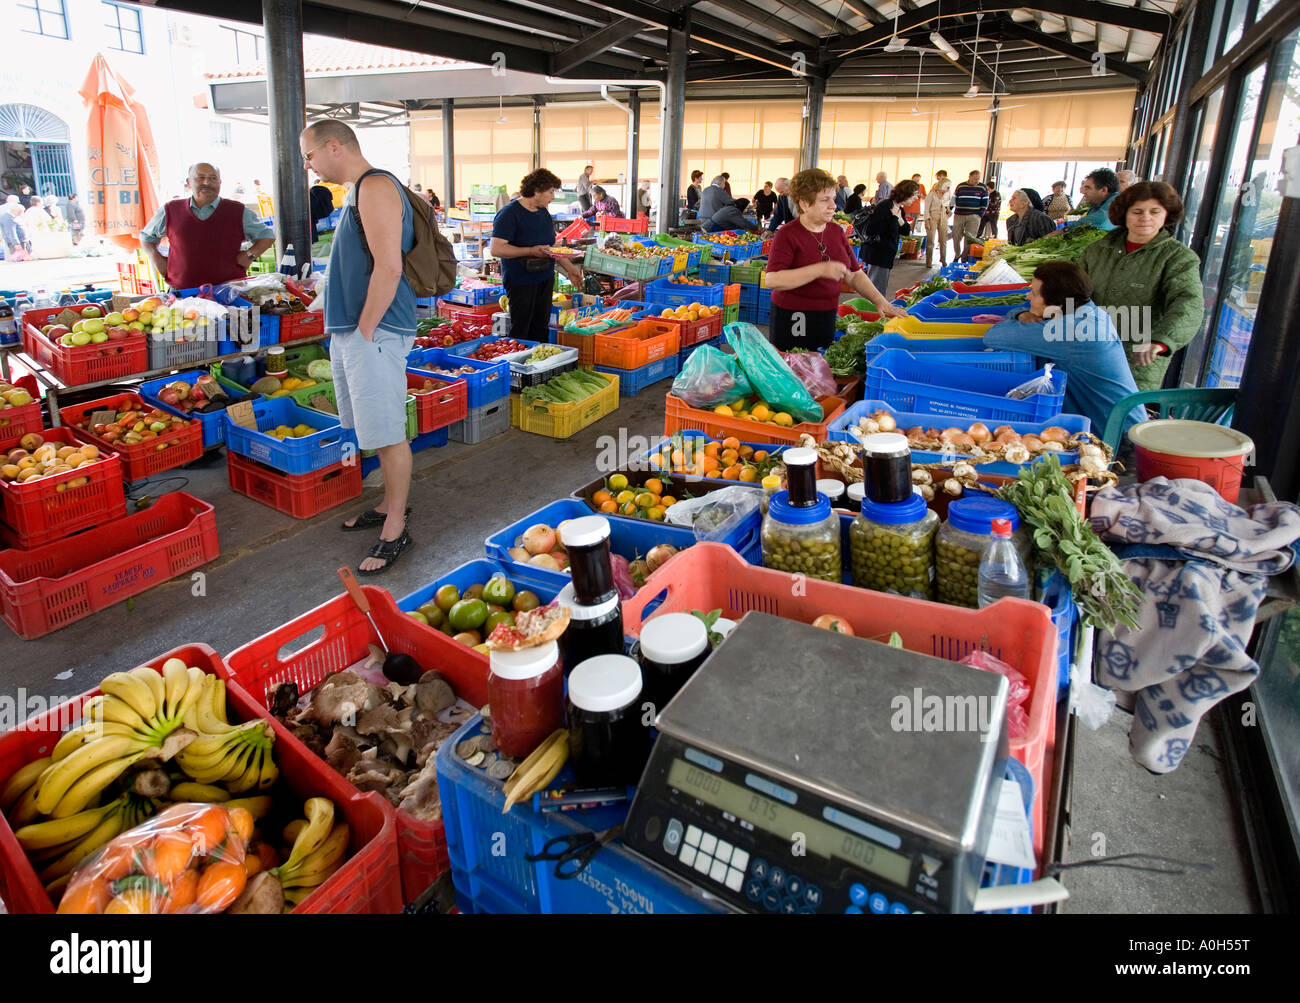 SHOPPERS WANDER AROUND THE PRODUCE MARKET AT PAPHOS, CYPRUS Stock Photo